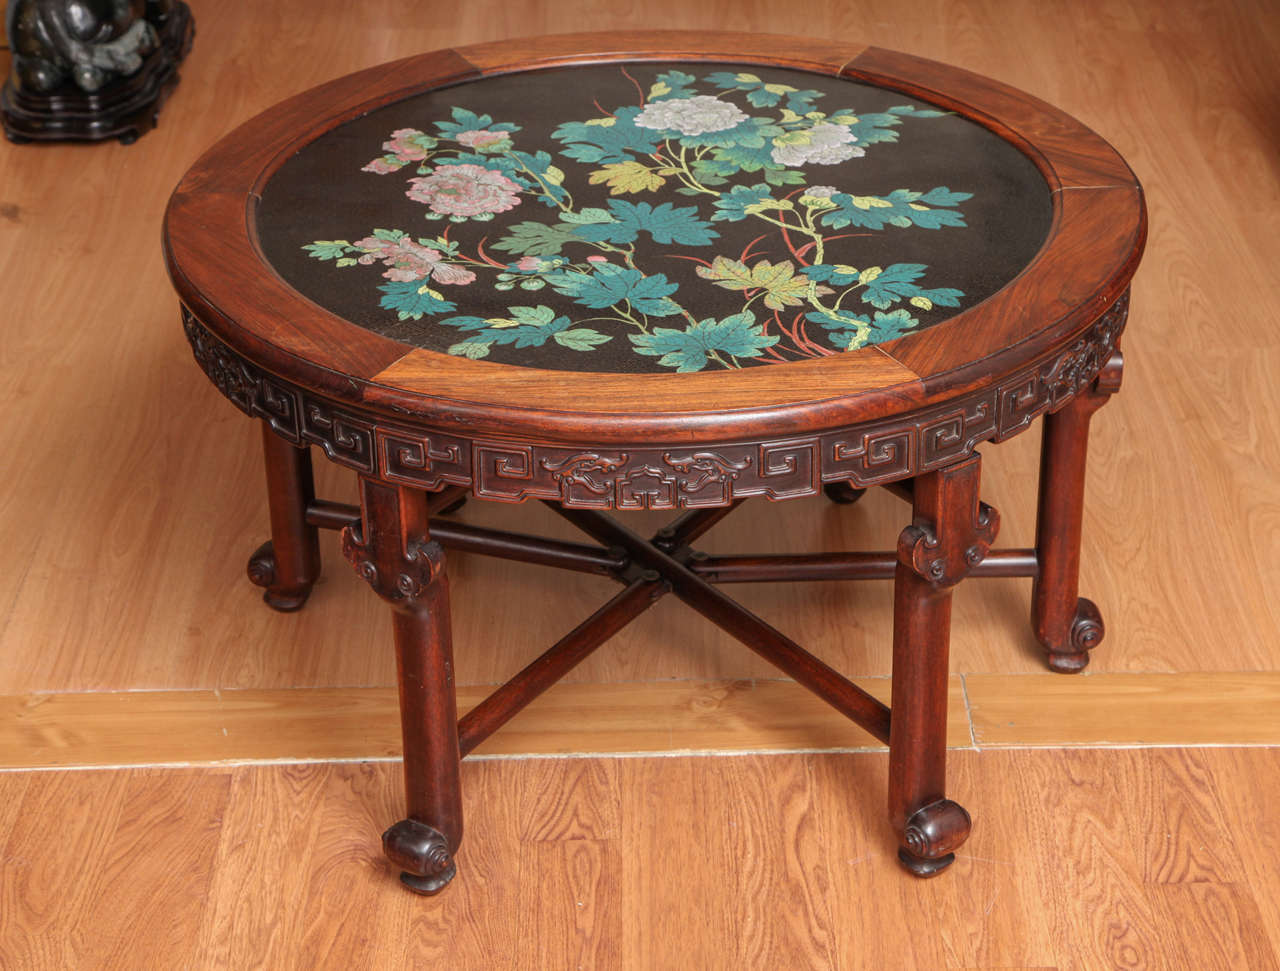 Antique Chinese carved rosewood and floral enamel cloisonné circular low/coffee table. The pink peonies and verdant leaves are highlighted by the inky black background. The rosewood is carved into geometric shapes with shaped feet, circa 1900.

 